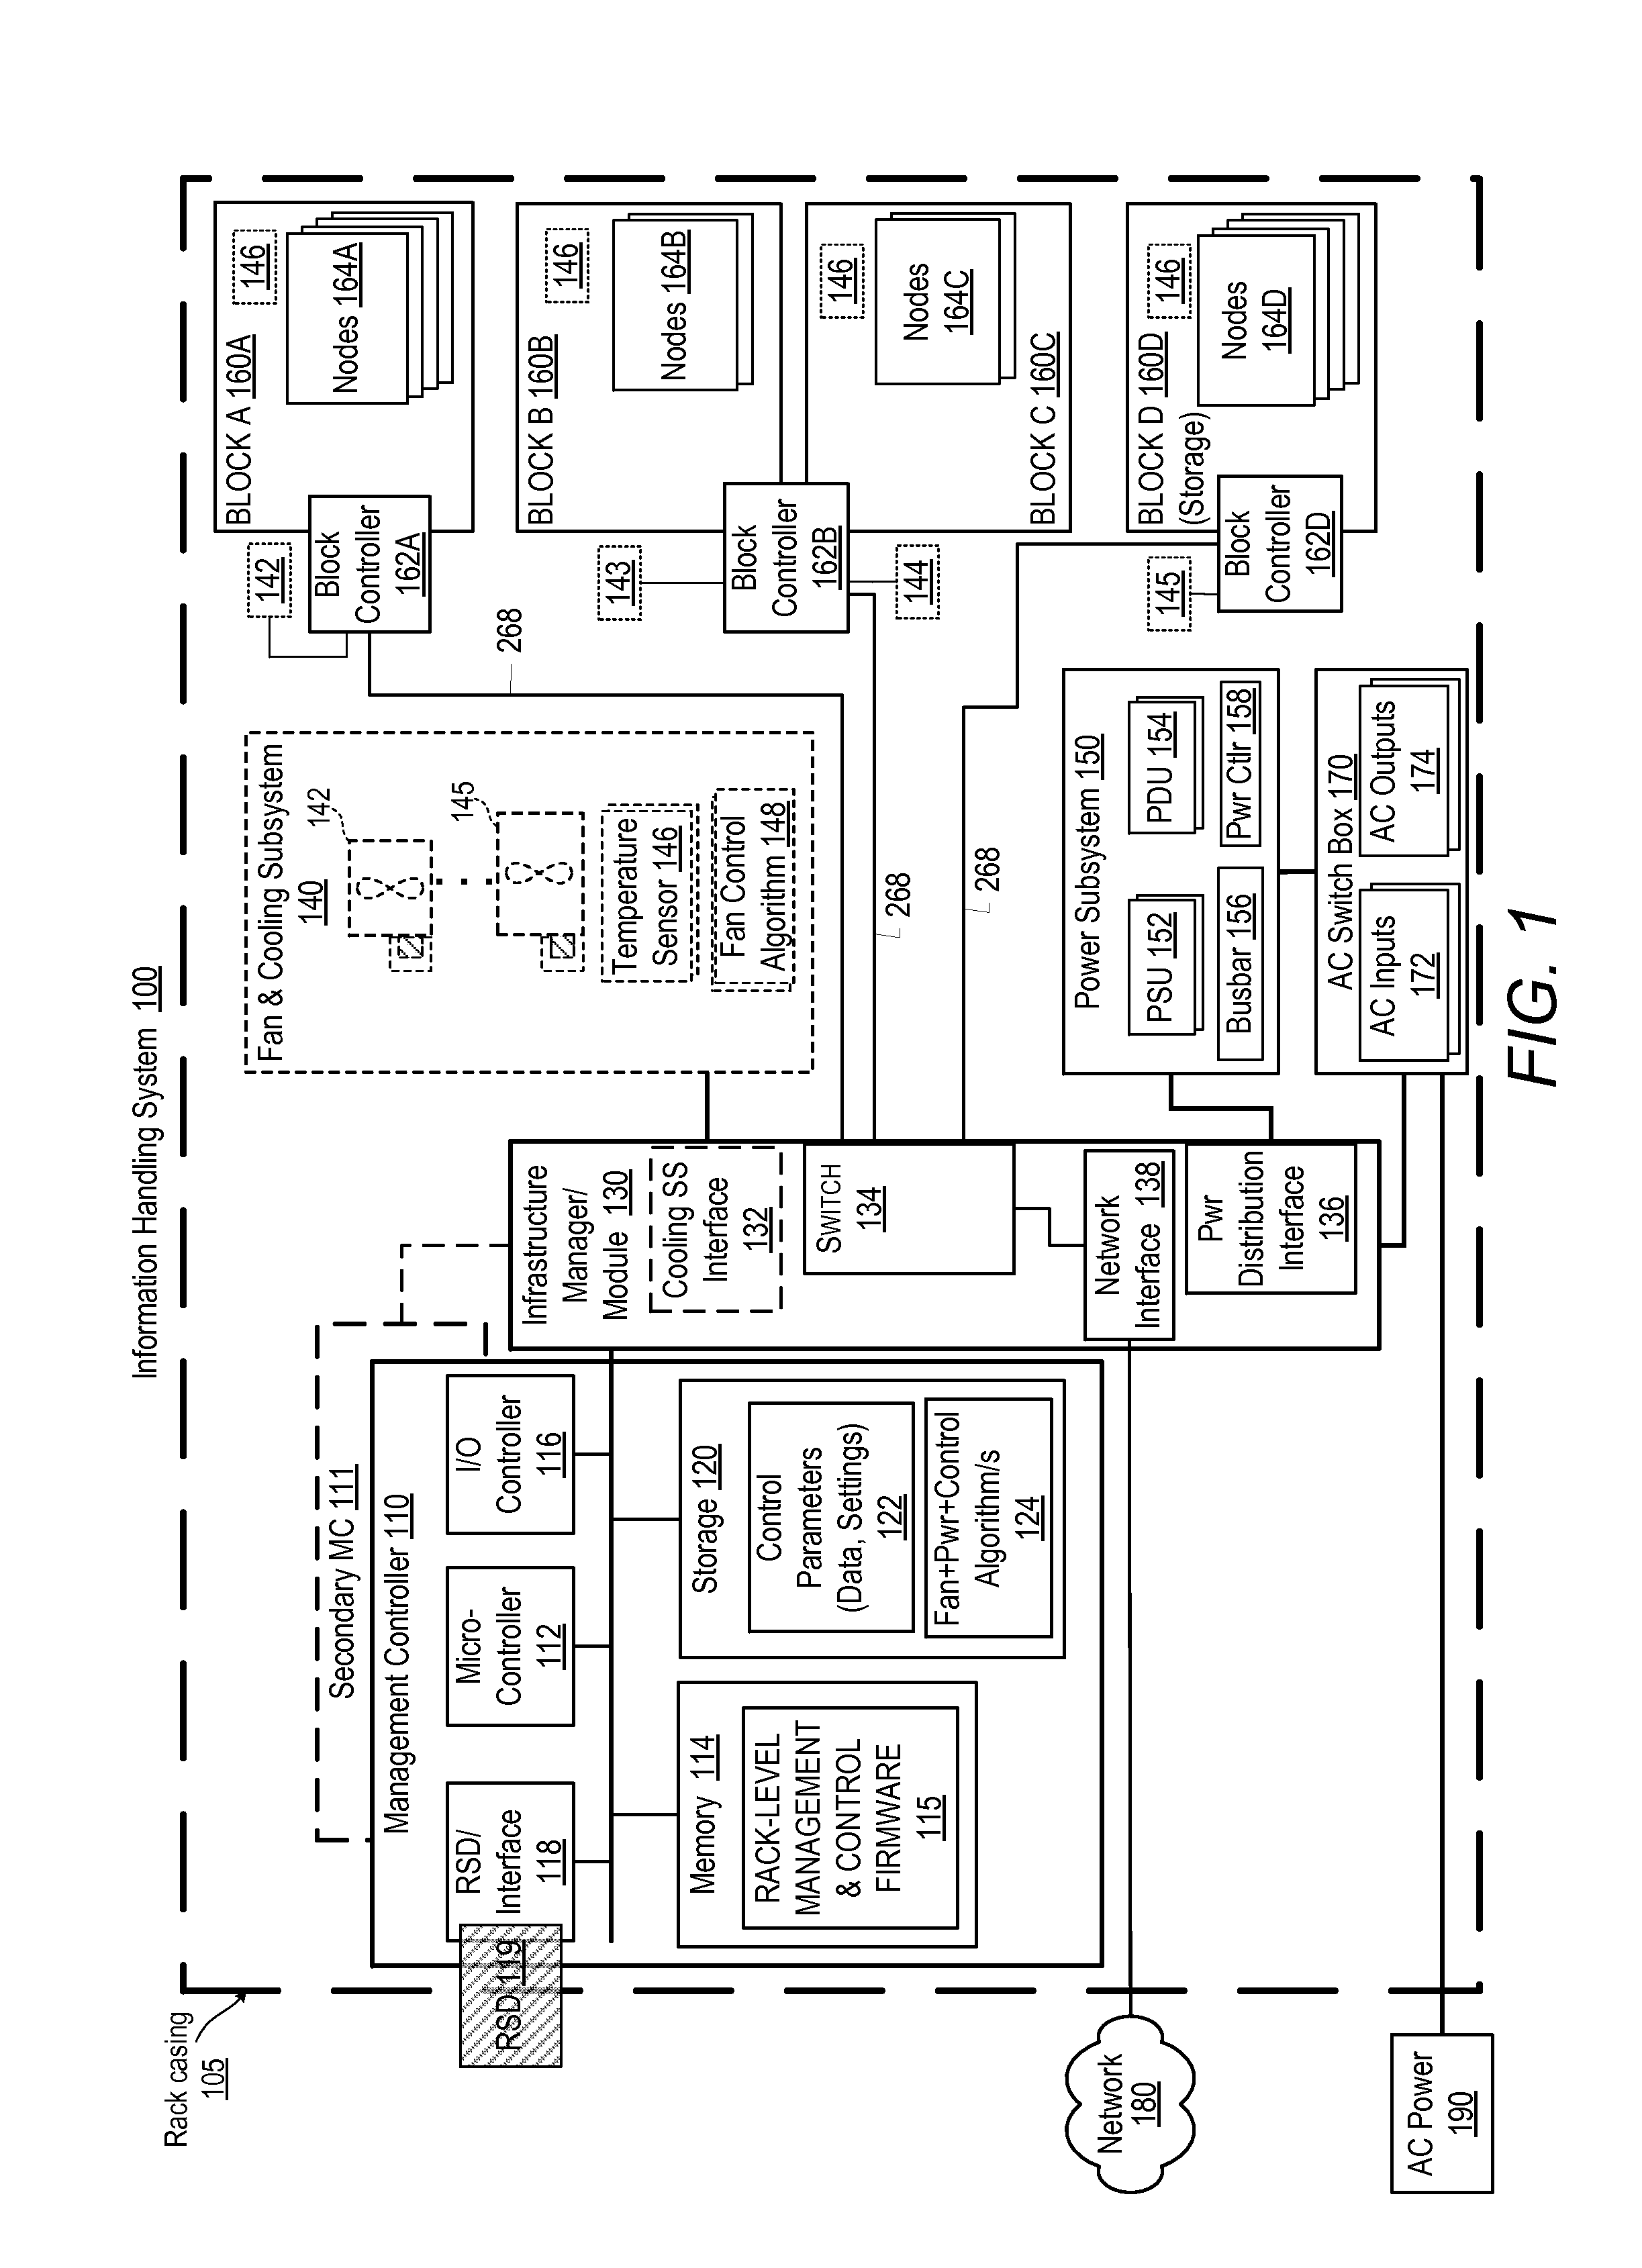 Predictive power capping and power allocation to computing nodes in a rack-based information handling system